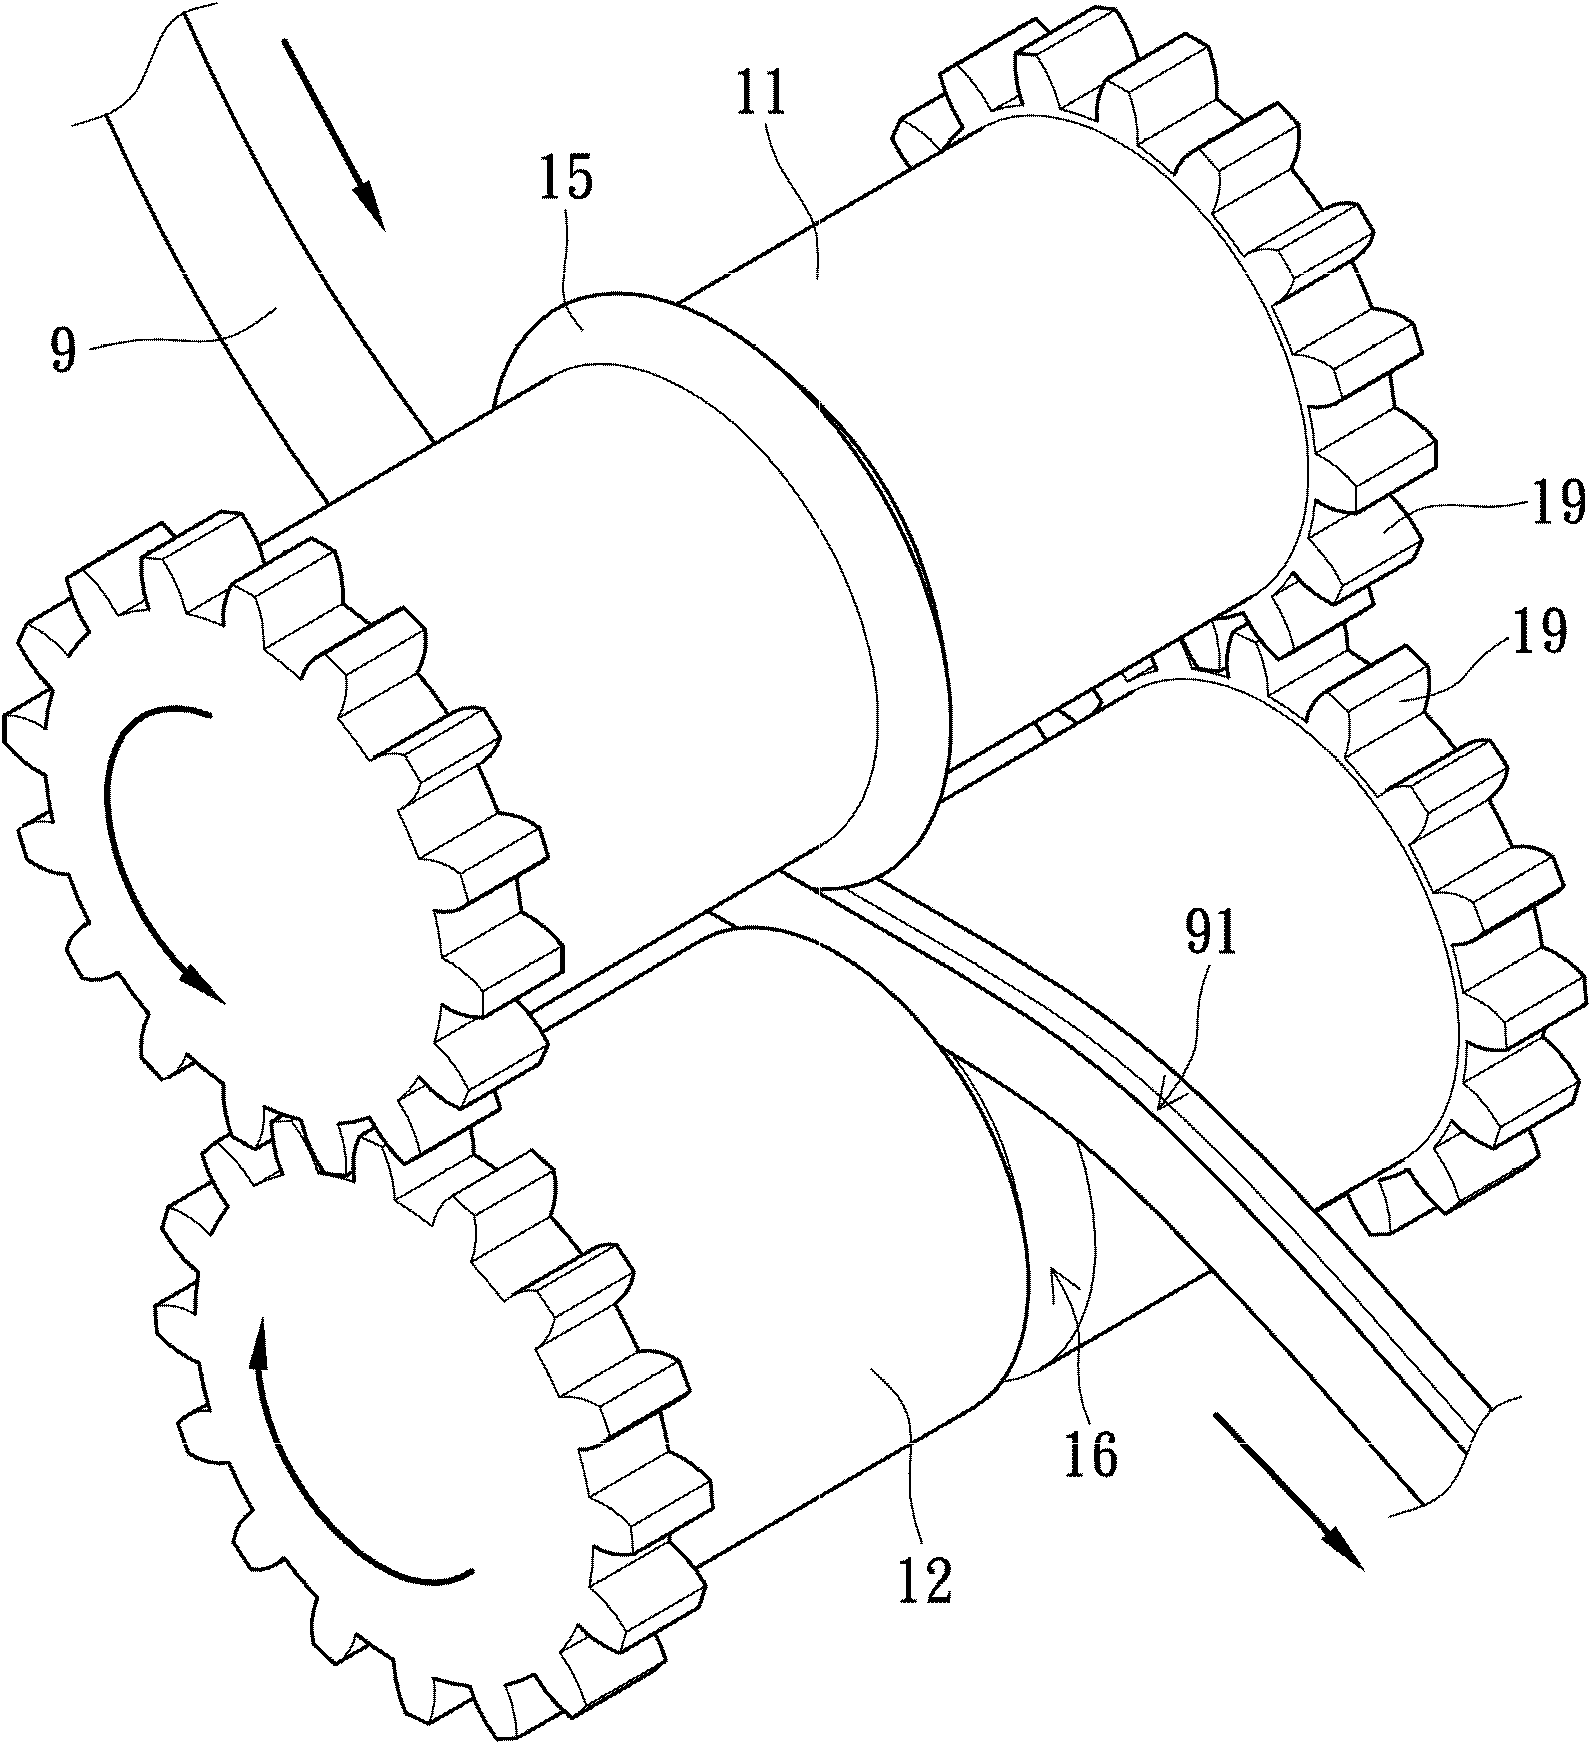 Bonding wire cutting machine and bonding wire cutting control method